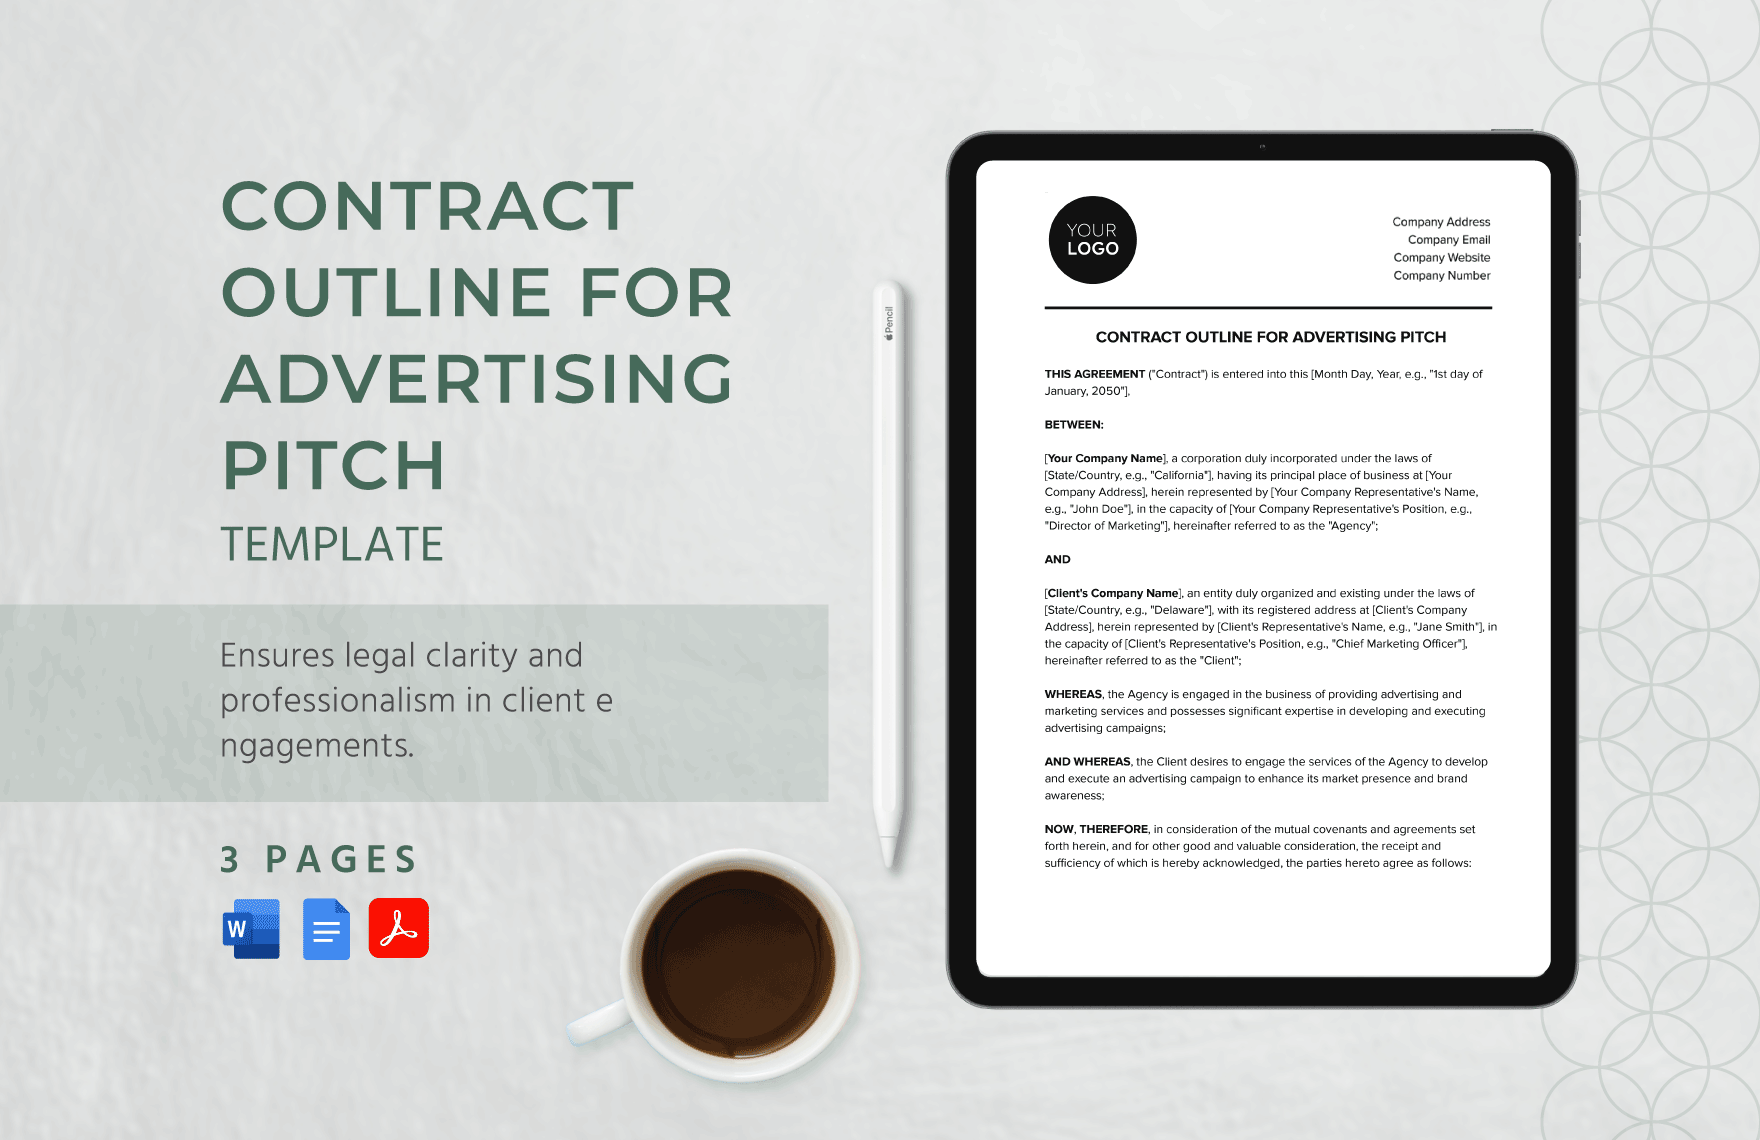 Contract Outline for Advertising Pitch Template